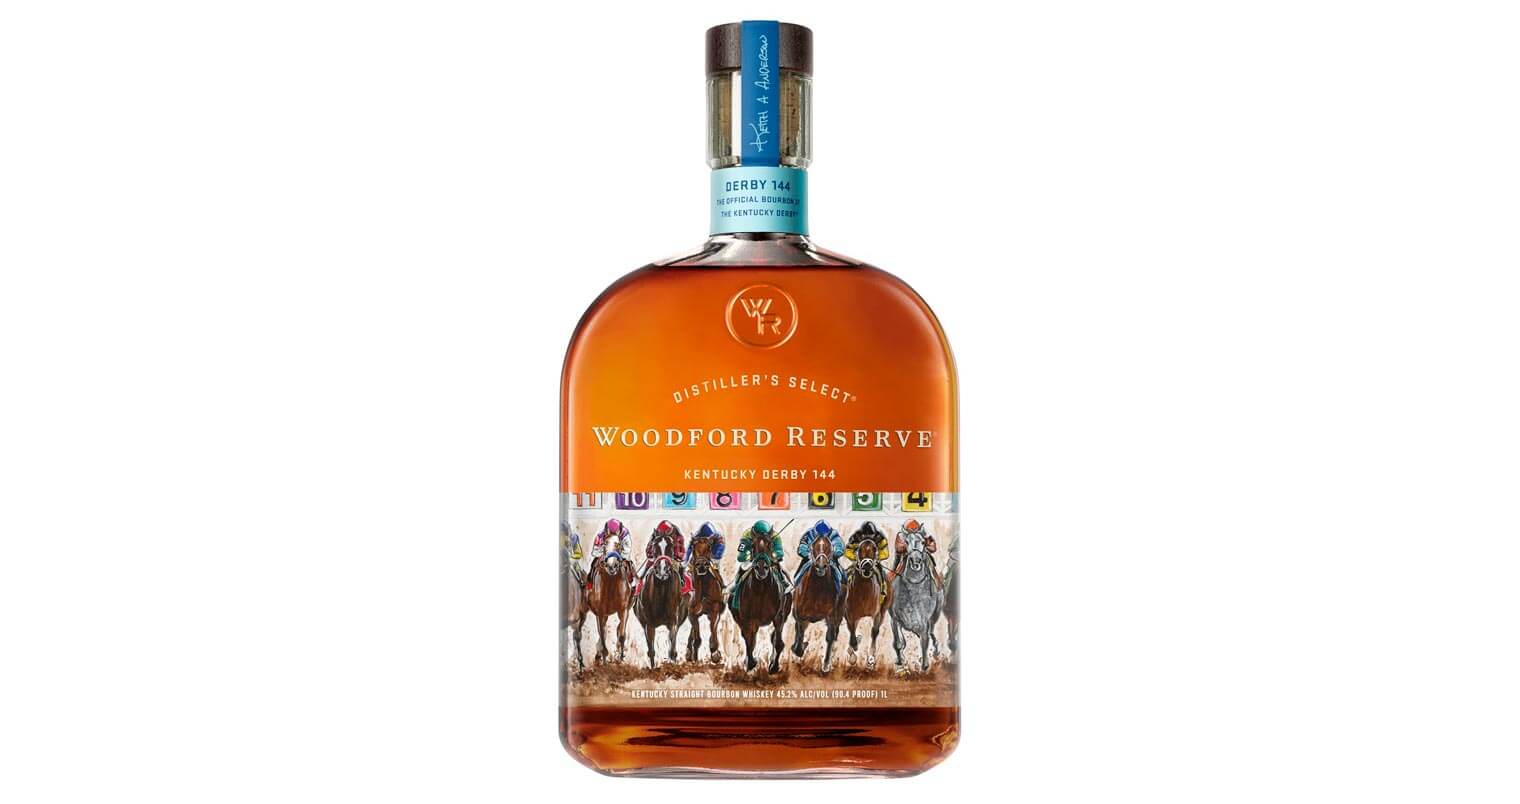 Woodford Reserve 2018 Kentucky Derby Bottle, on white, featured image